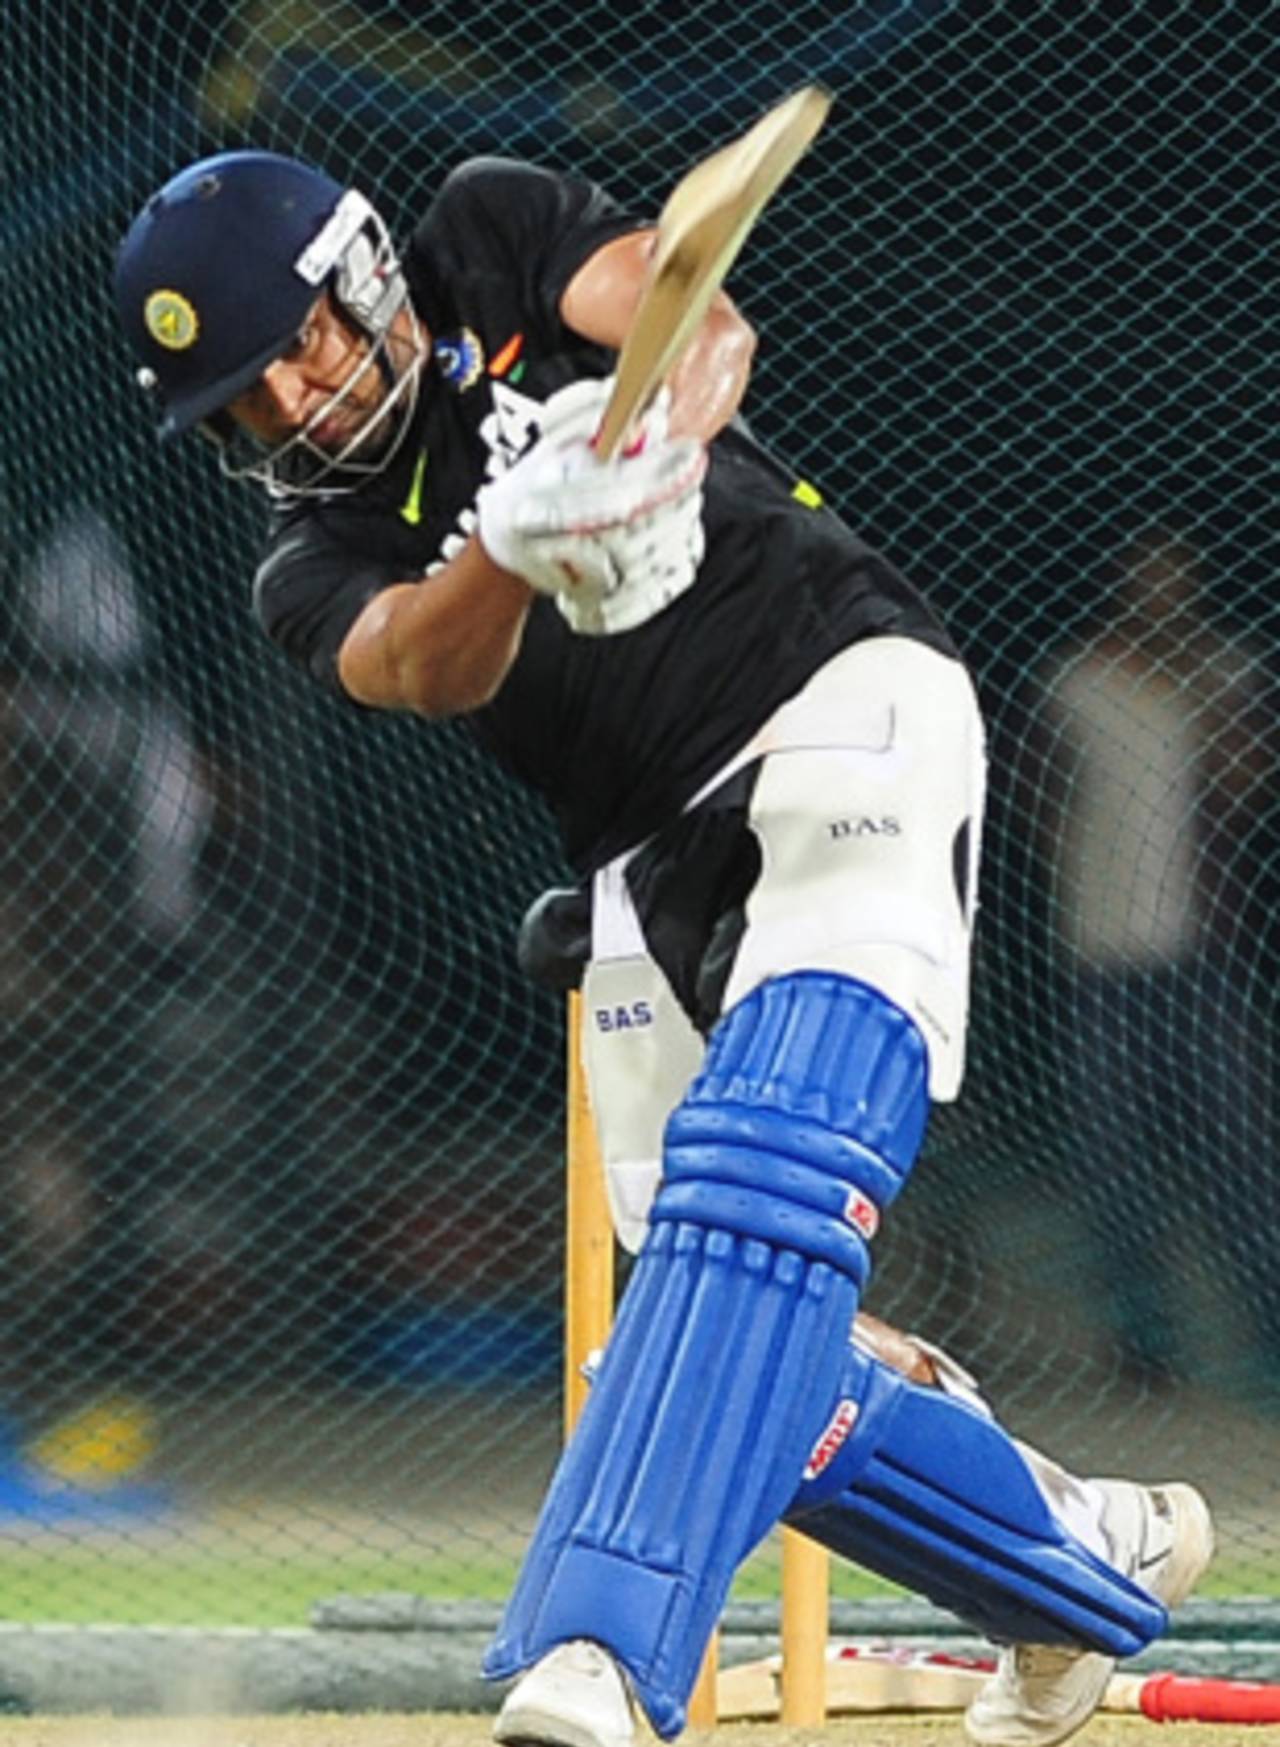 Rohit Sharma plays a shot in a training session, Colombo, July 27, 2012